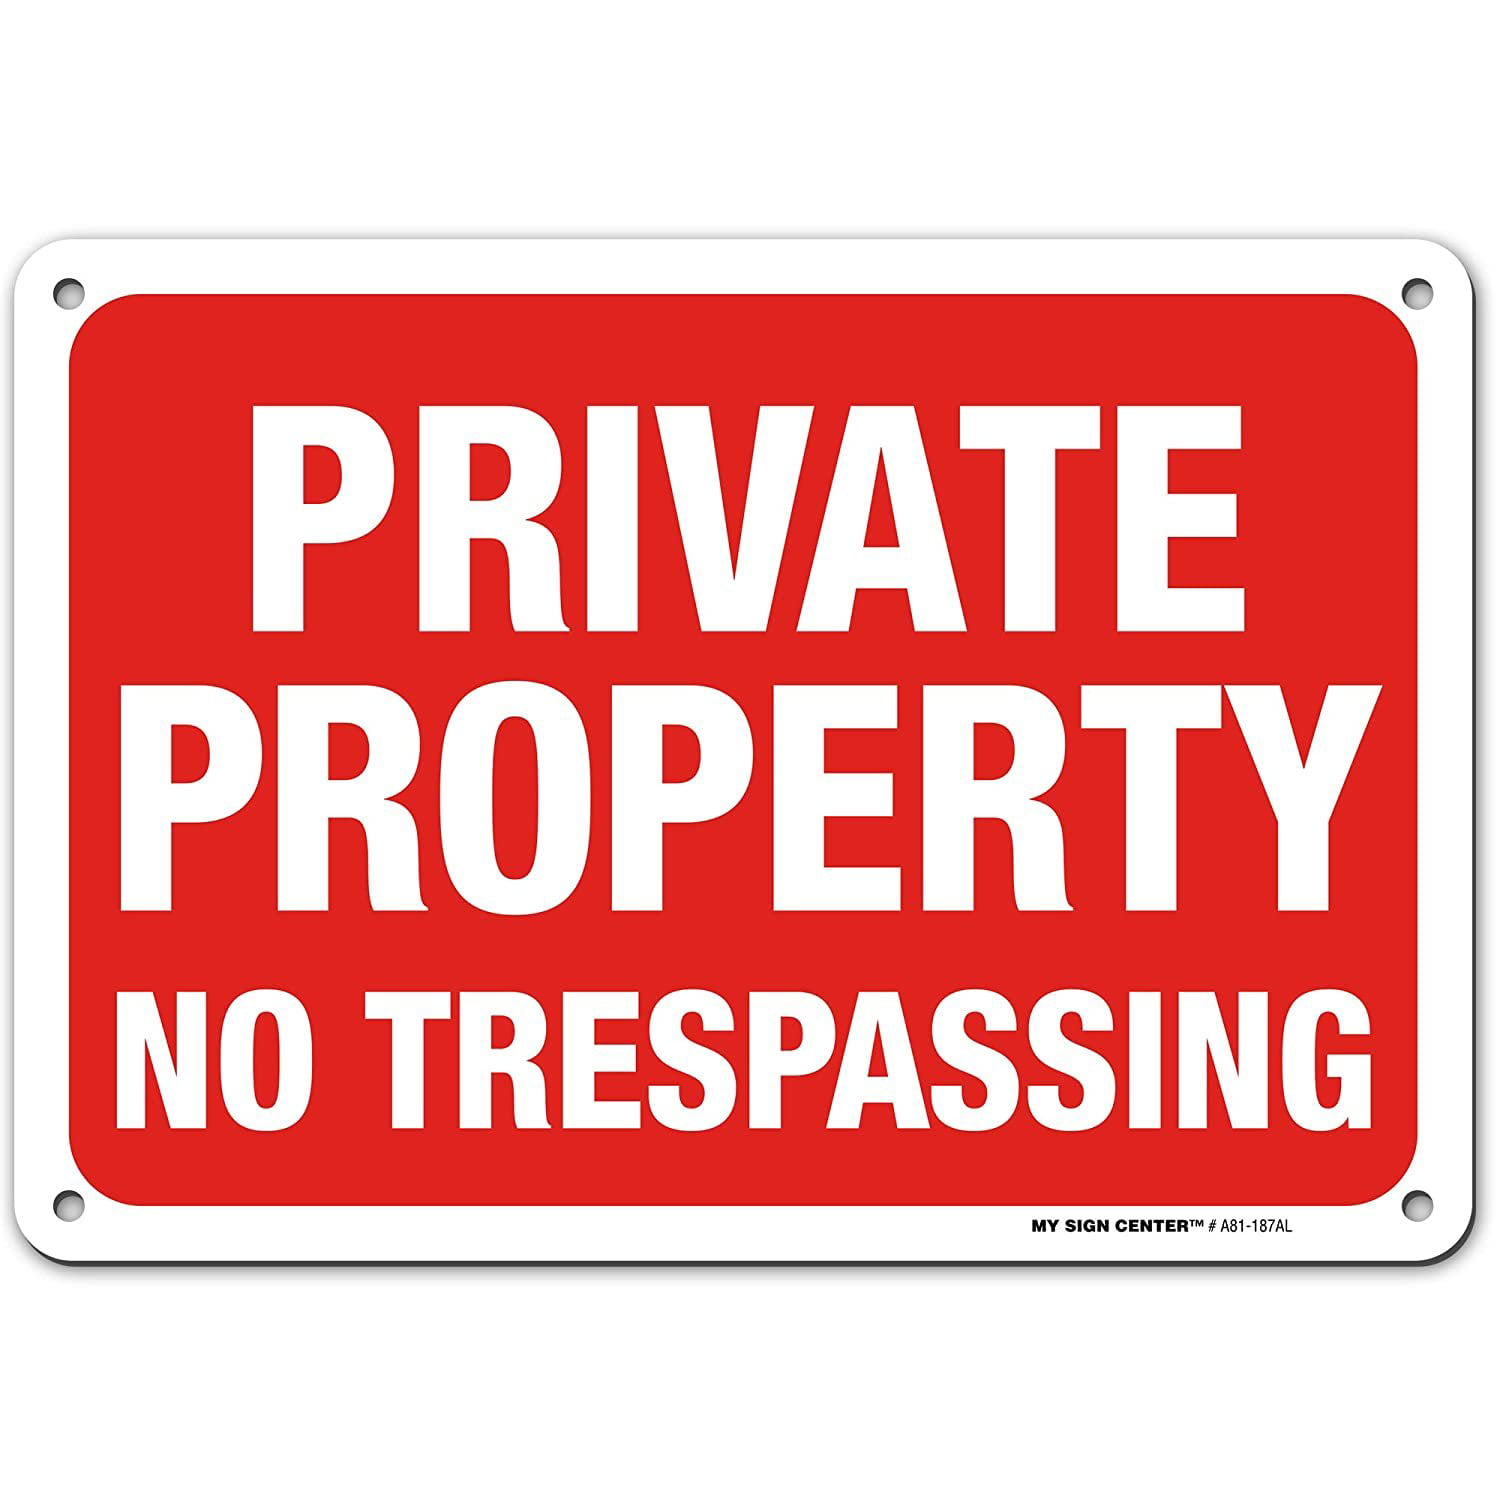 No Trespassing Warning 8"x12" Aluminum Sign Private Property